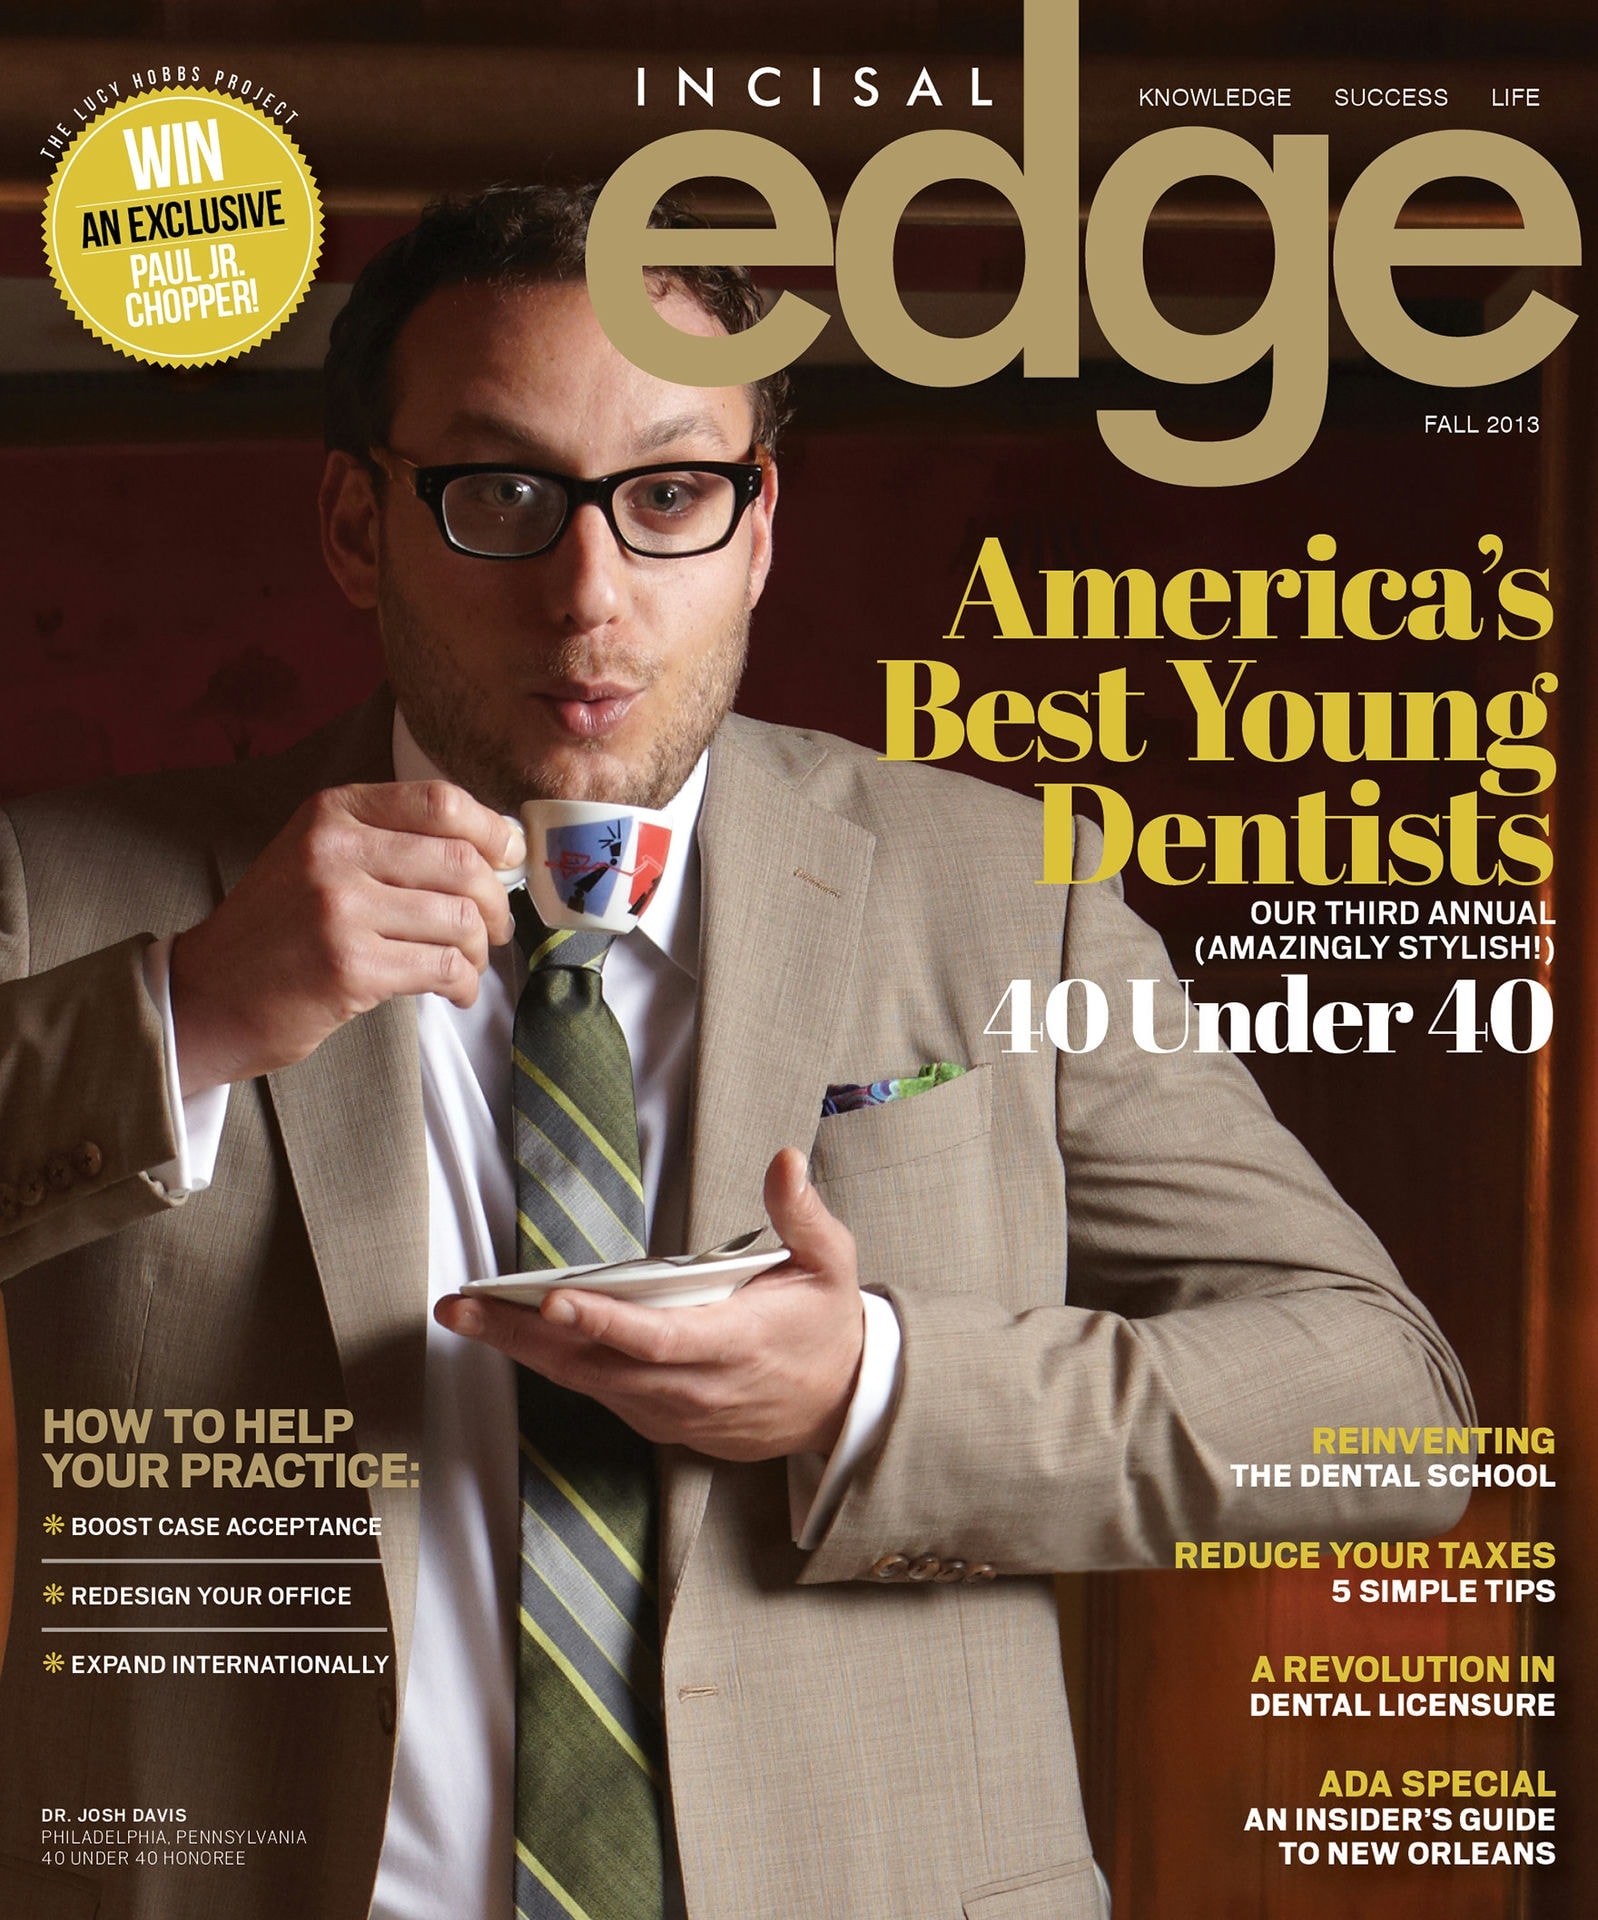 Published by Benco Dental, Incisal Edge, the leading lifestyle magazine for dental professionals nationwide celebrates dentists’ achievements both inside the operatory and during their hard-earned downtime.  On the cover of 2013’s 40 Under 40 edition is Dr. Josh Davis. (Photography Jeff Fried/Style Director Joseph DeAcetis)